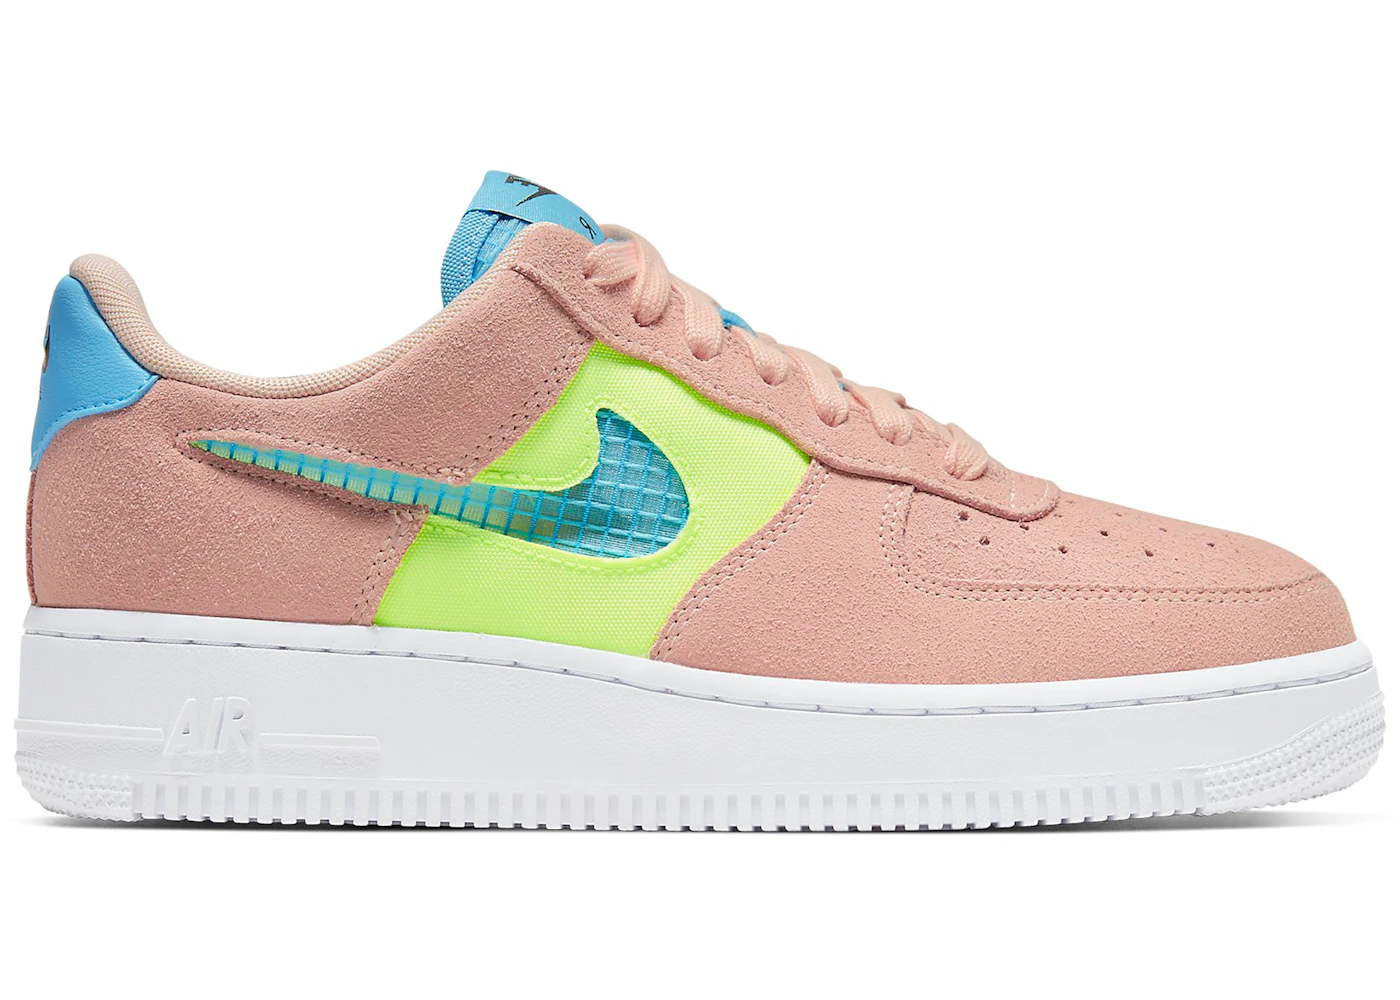 Nike Air Force 1 Low Washed Coral Ghost Green (Women's) - CJ1647-600 - US